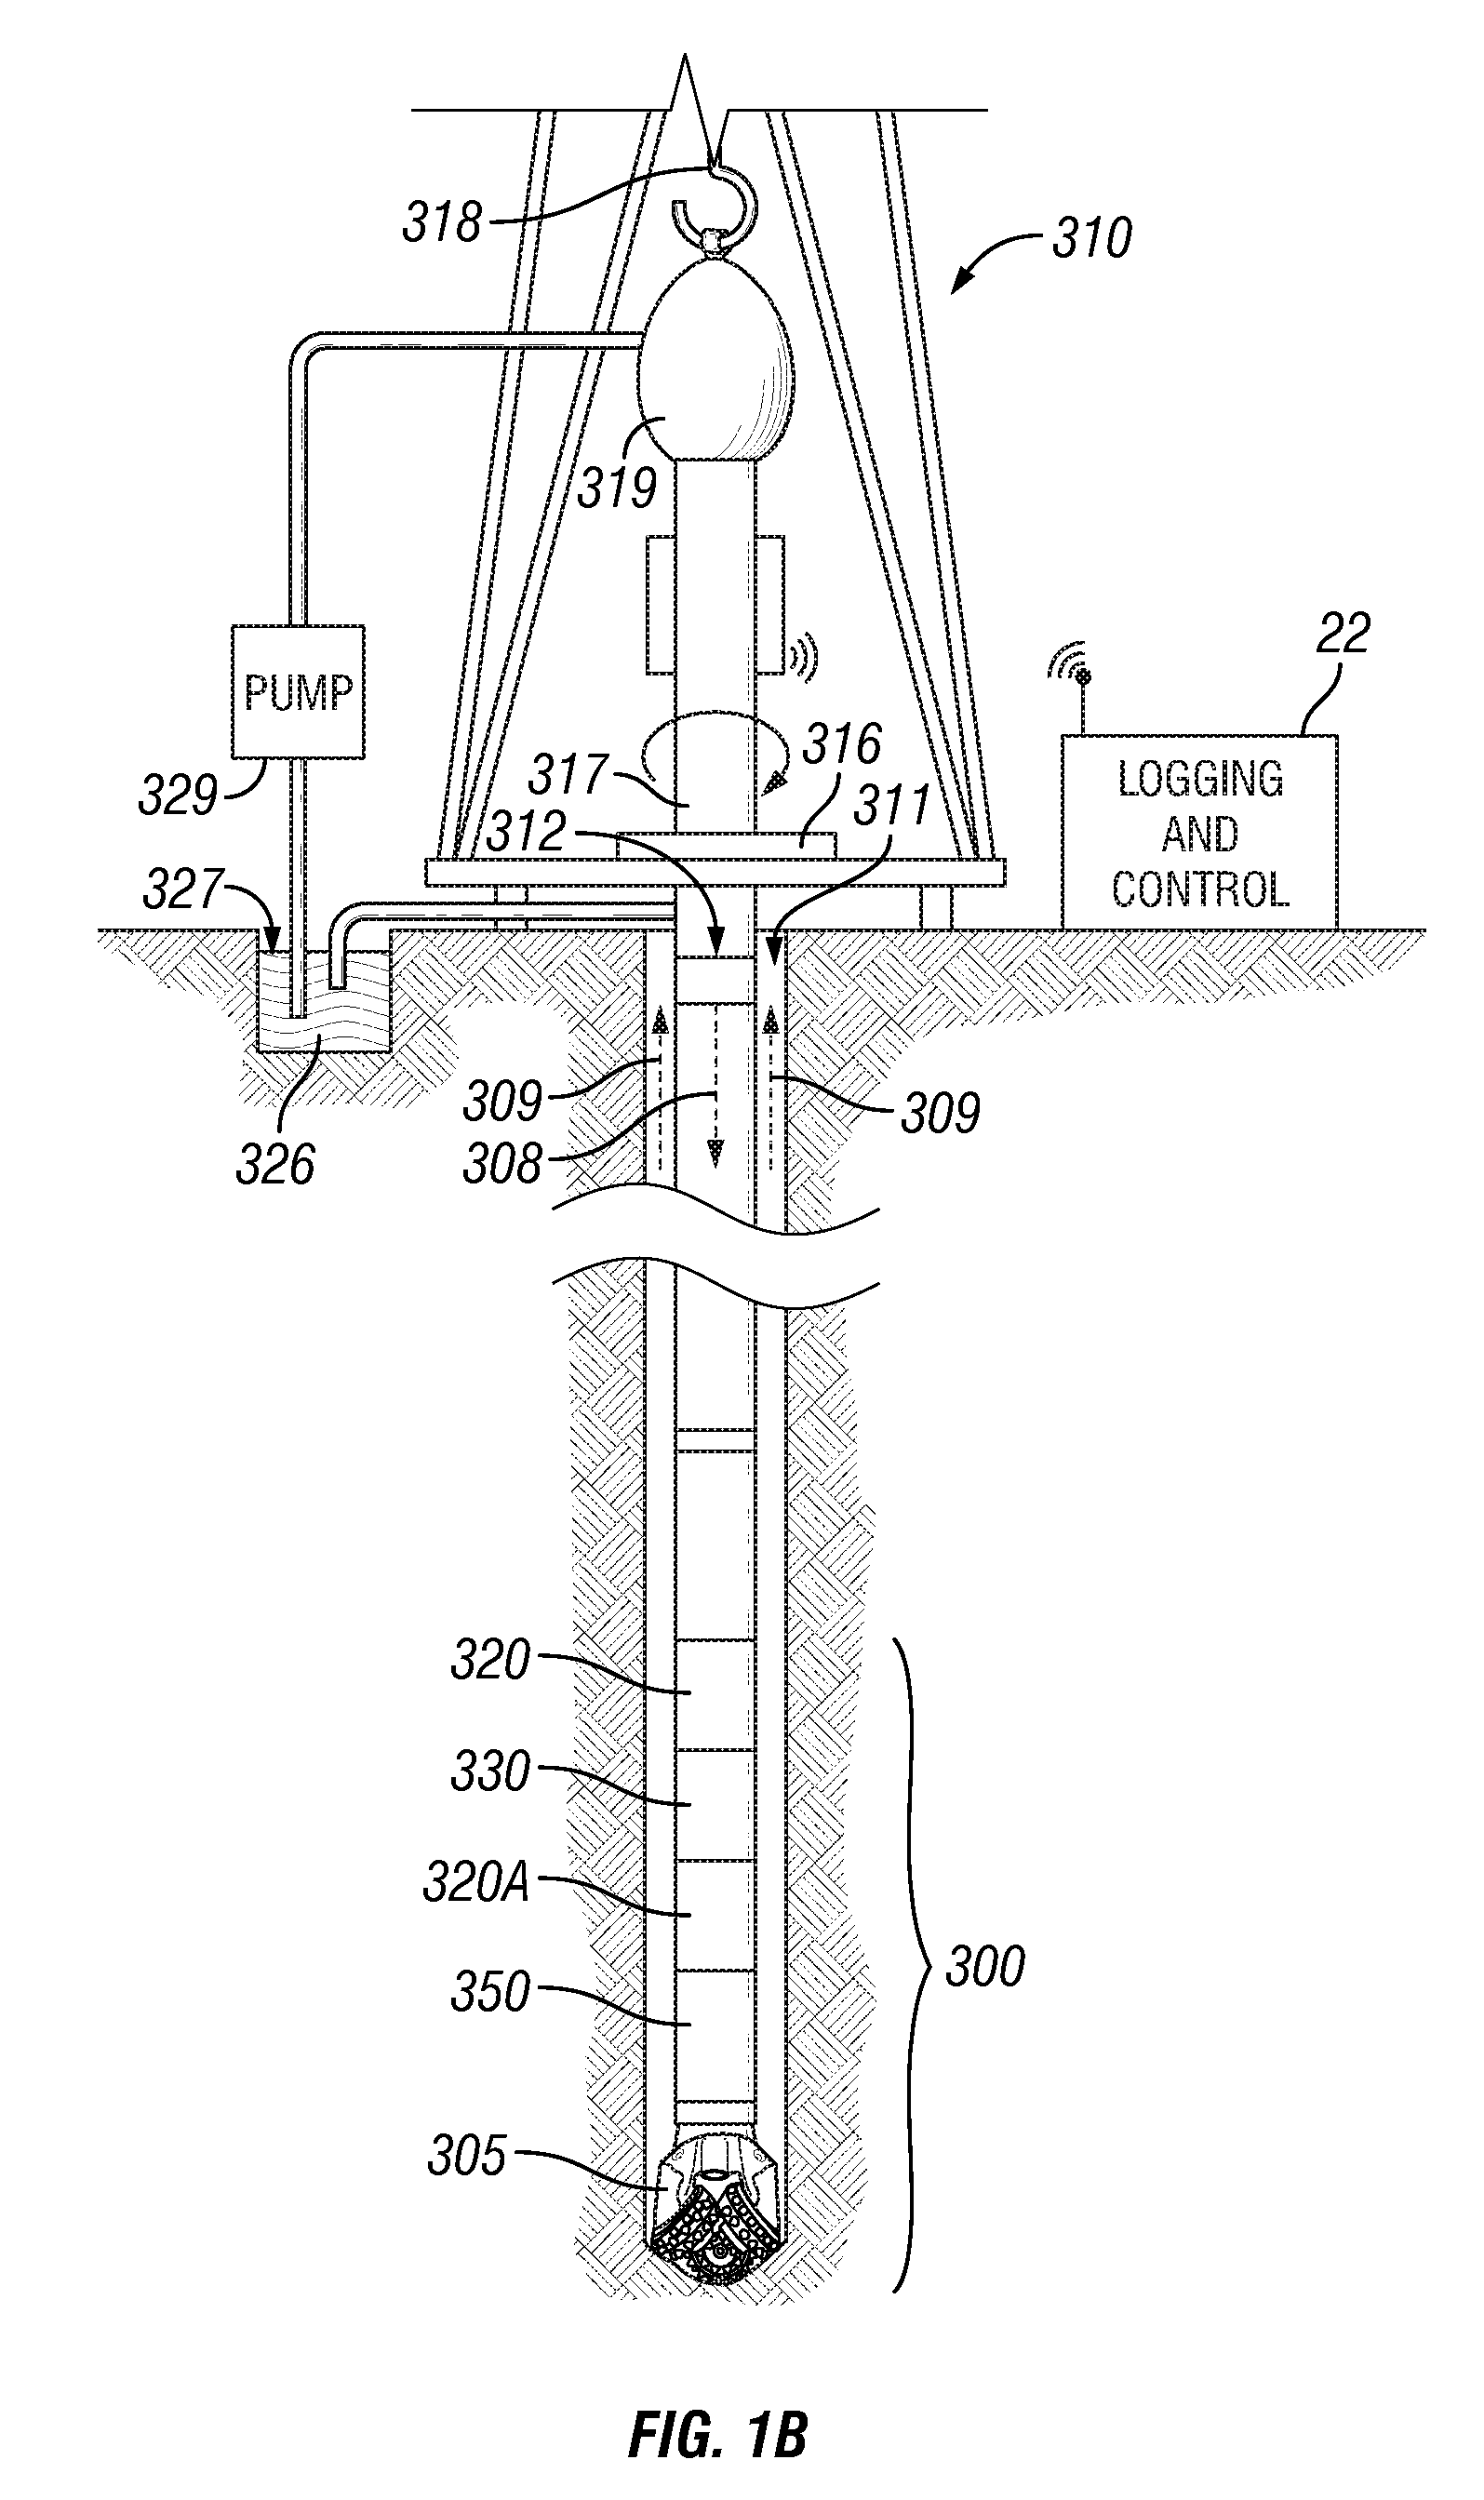 Method for estimating formation hydrocarbon saturation using nuclear magnetic resonance measurements